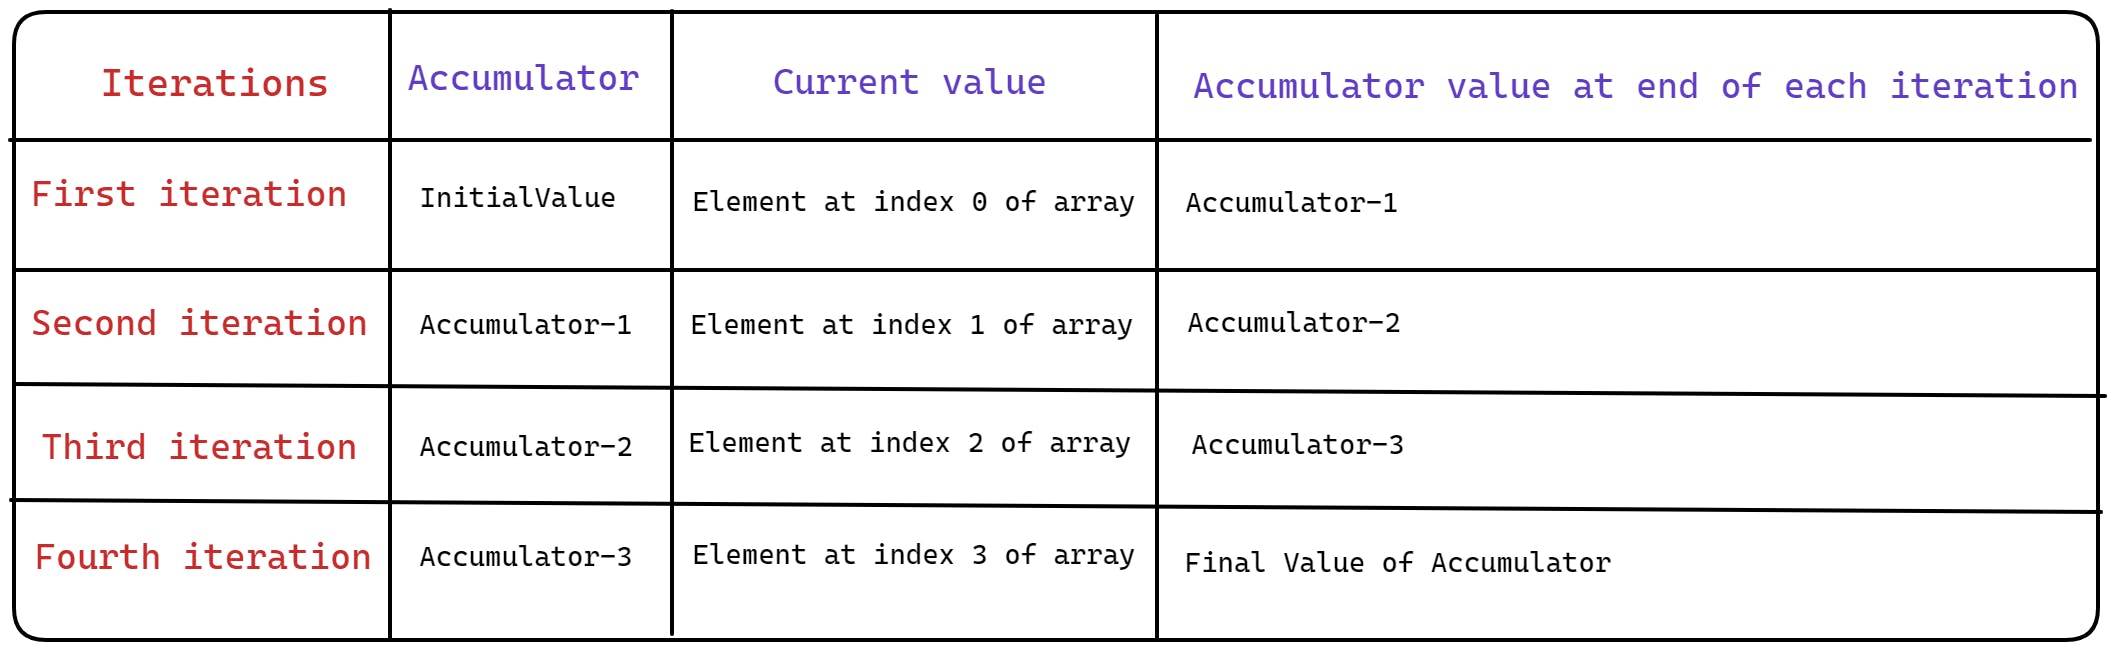 diagram explaining how current value and accumulator changes during each iteration when initial value is present.